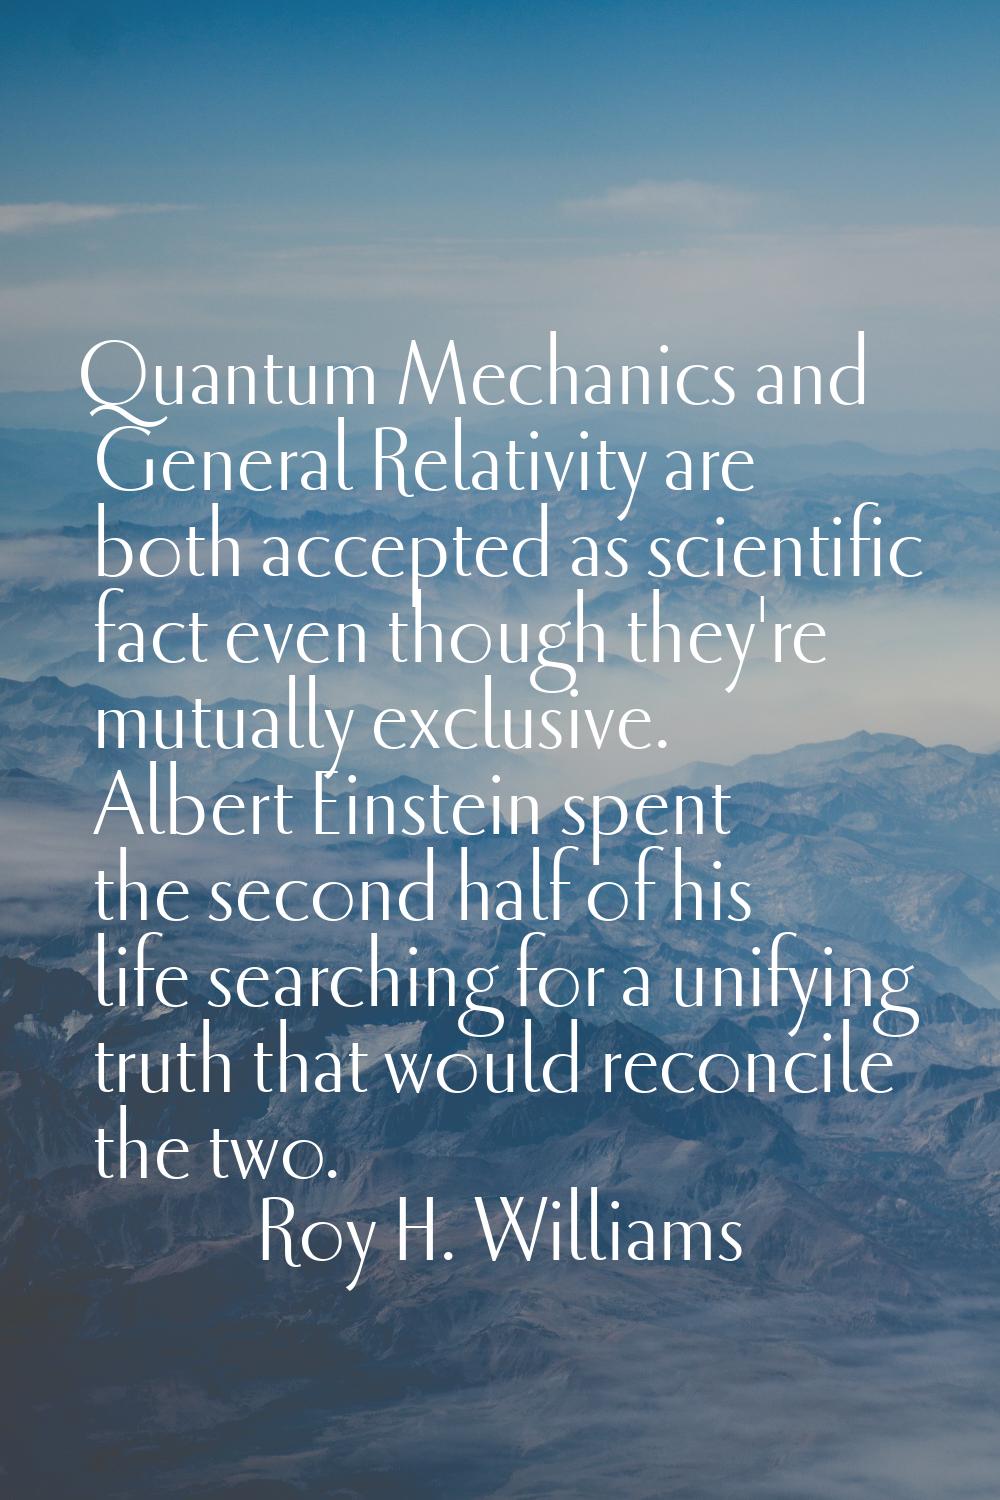 Quantum Mechanics and General Relativity are both accepted as scientific fact even though they're m